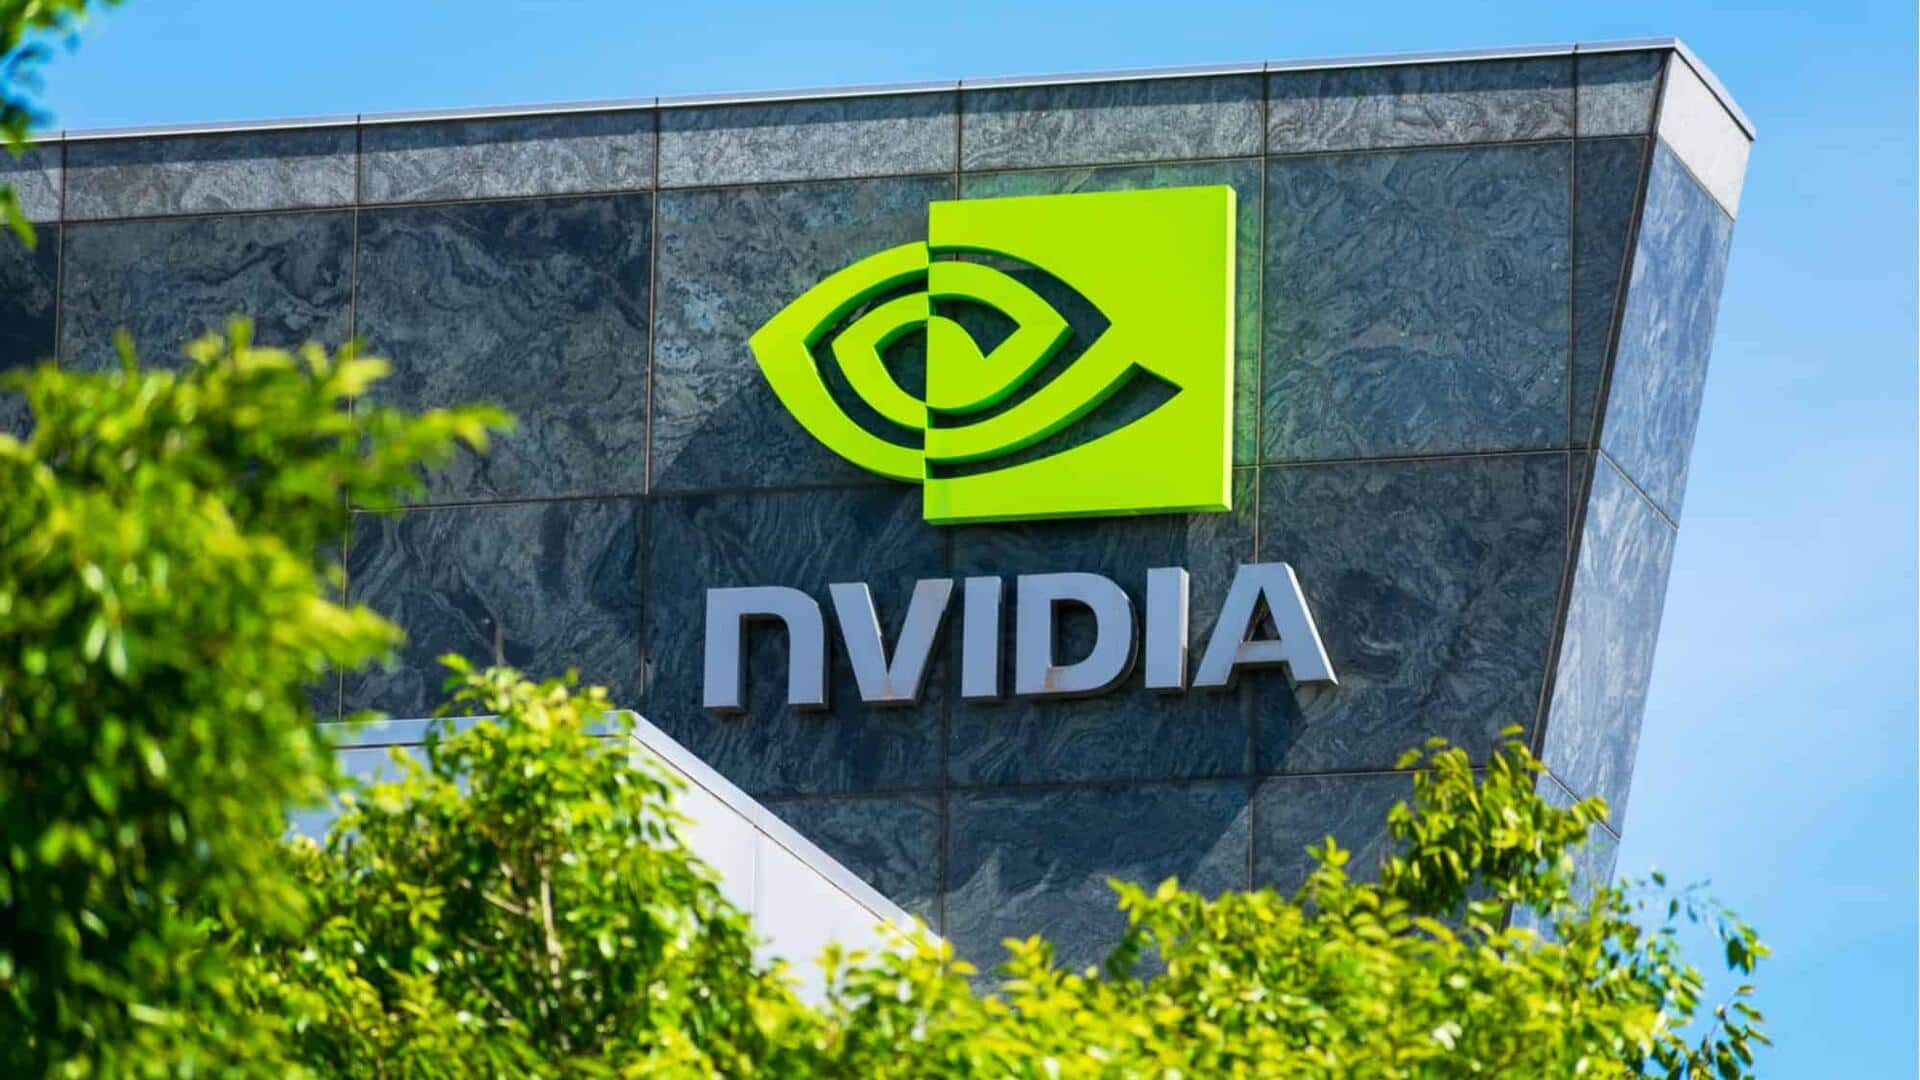 NVIDIA to discuss semiconductor cooperation deals in Vietnam next week